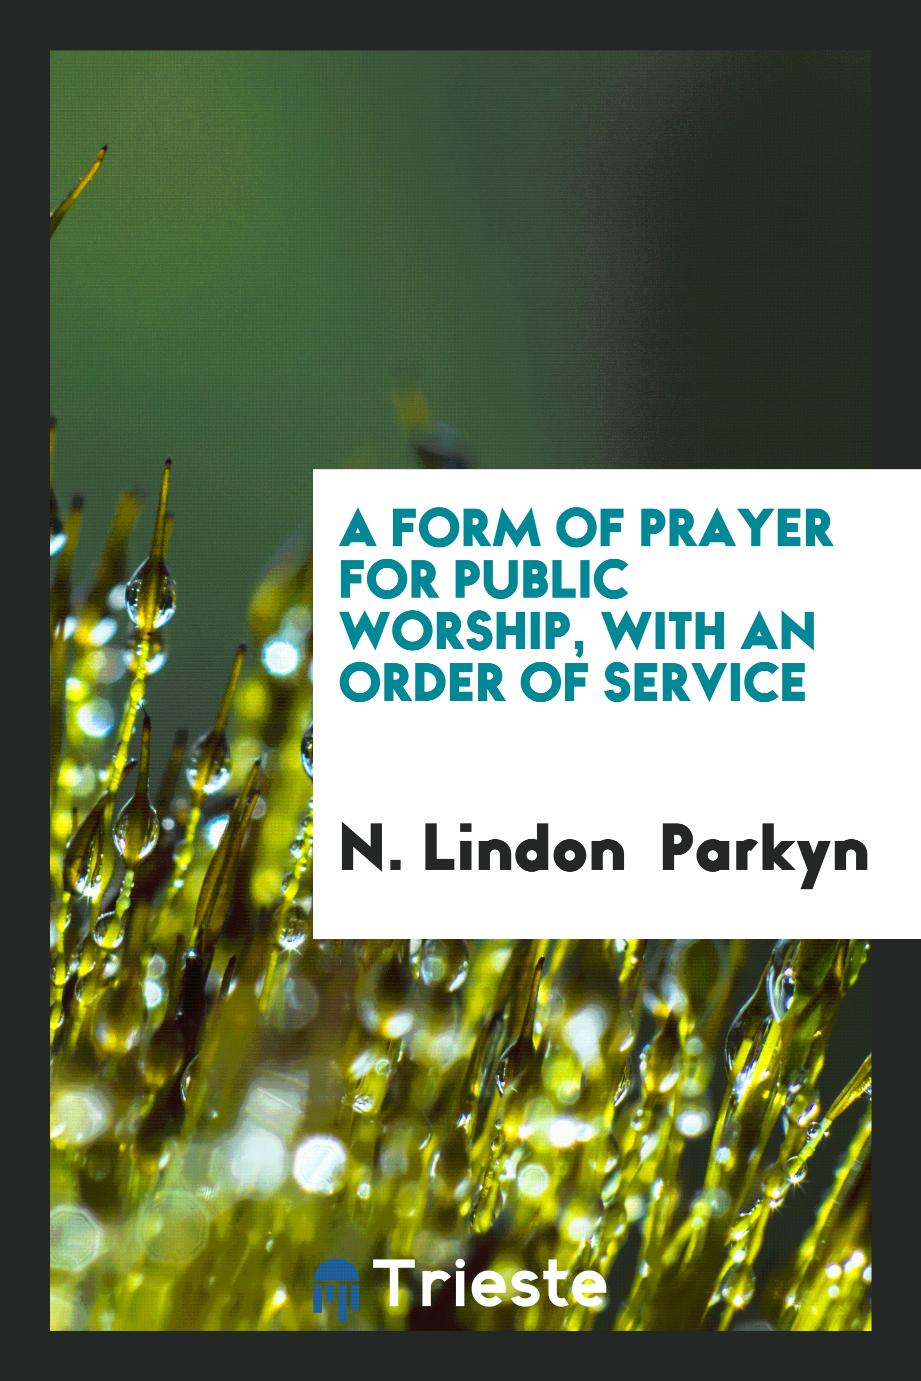 A form of prayer for public worship, with an order of service